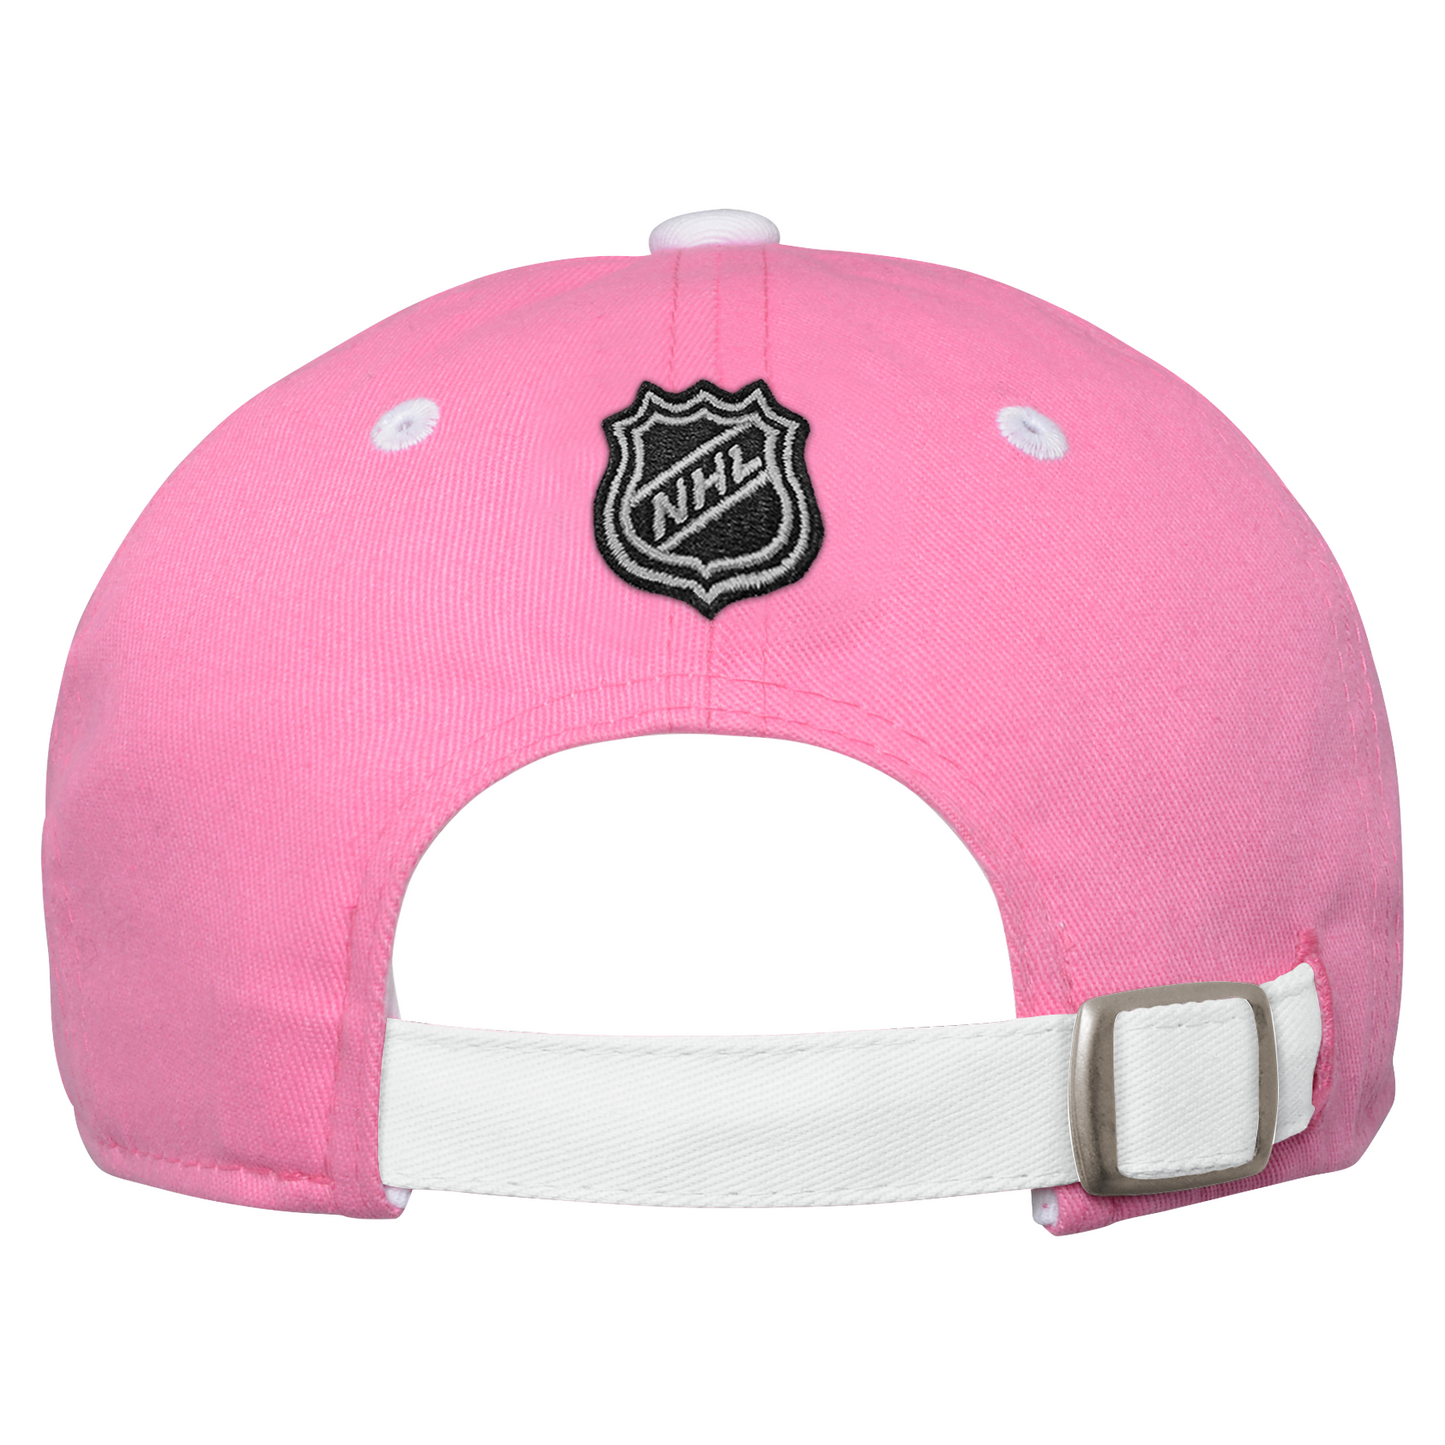 Outerstuff Girls Pink Unstructred Adjustable Cap